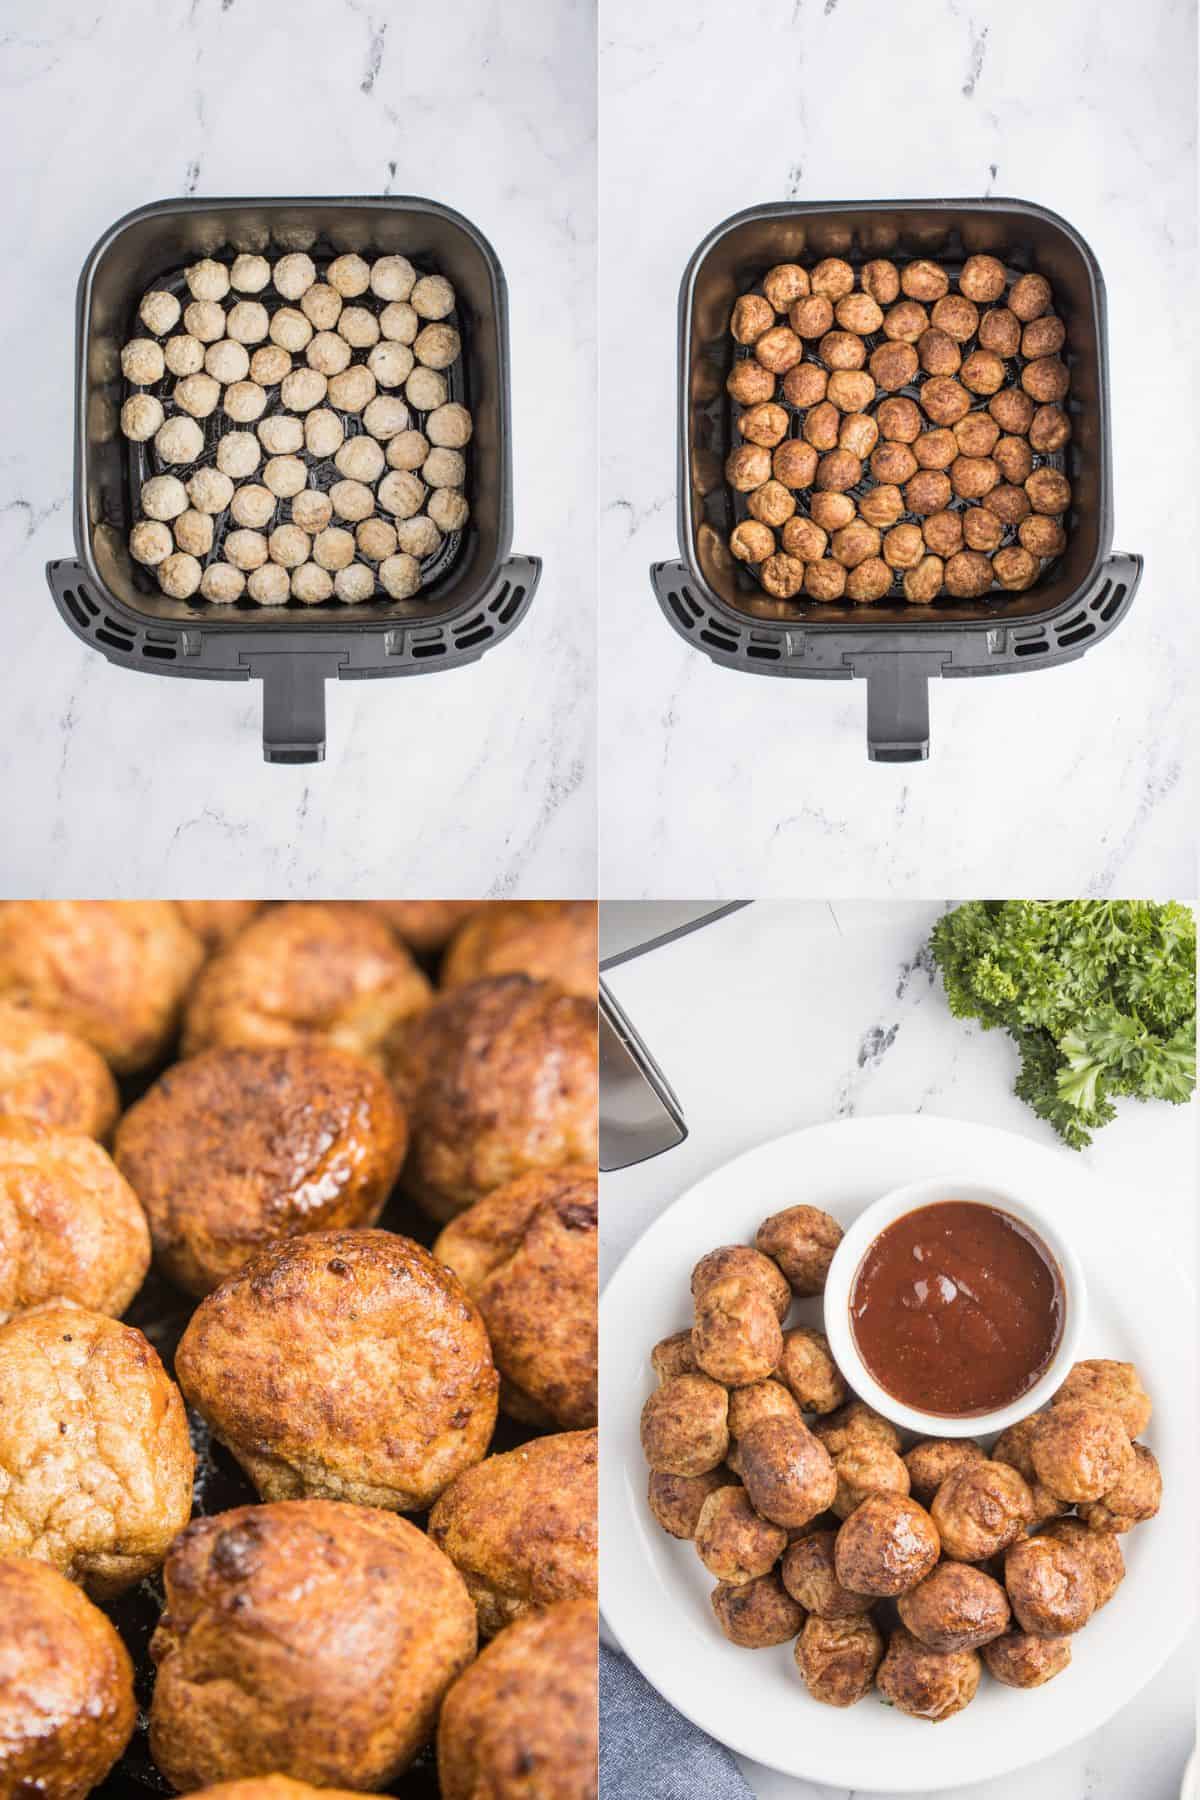 The collage includes images of frozen meatballs in an air fryer basket, golden brown cooked meatballs, and a close-up of the cooked meatballs on a plate with a side of sauce.